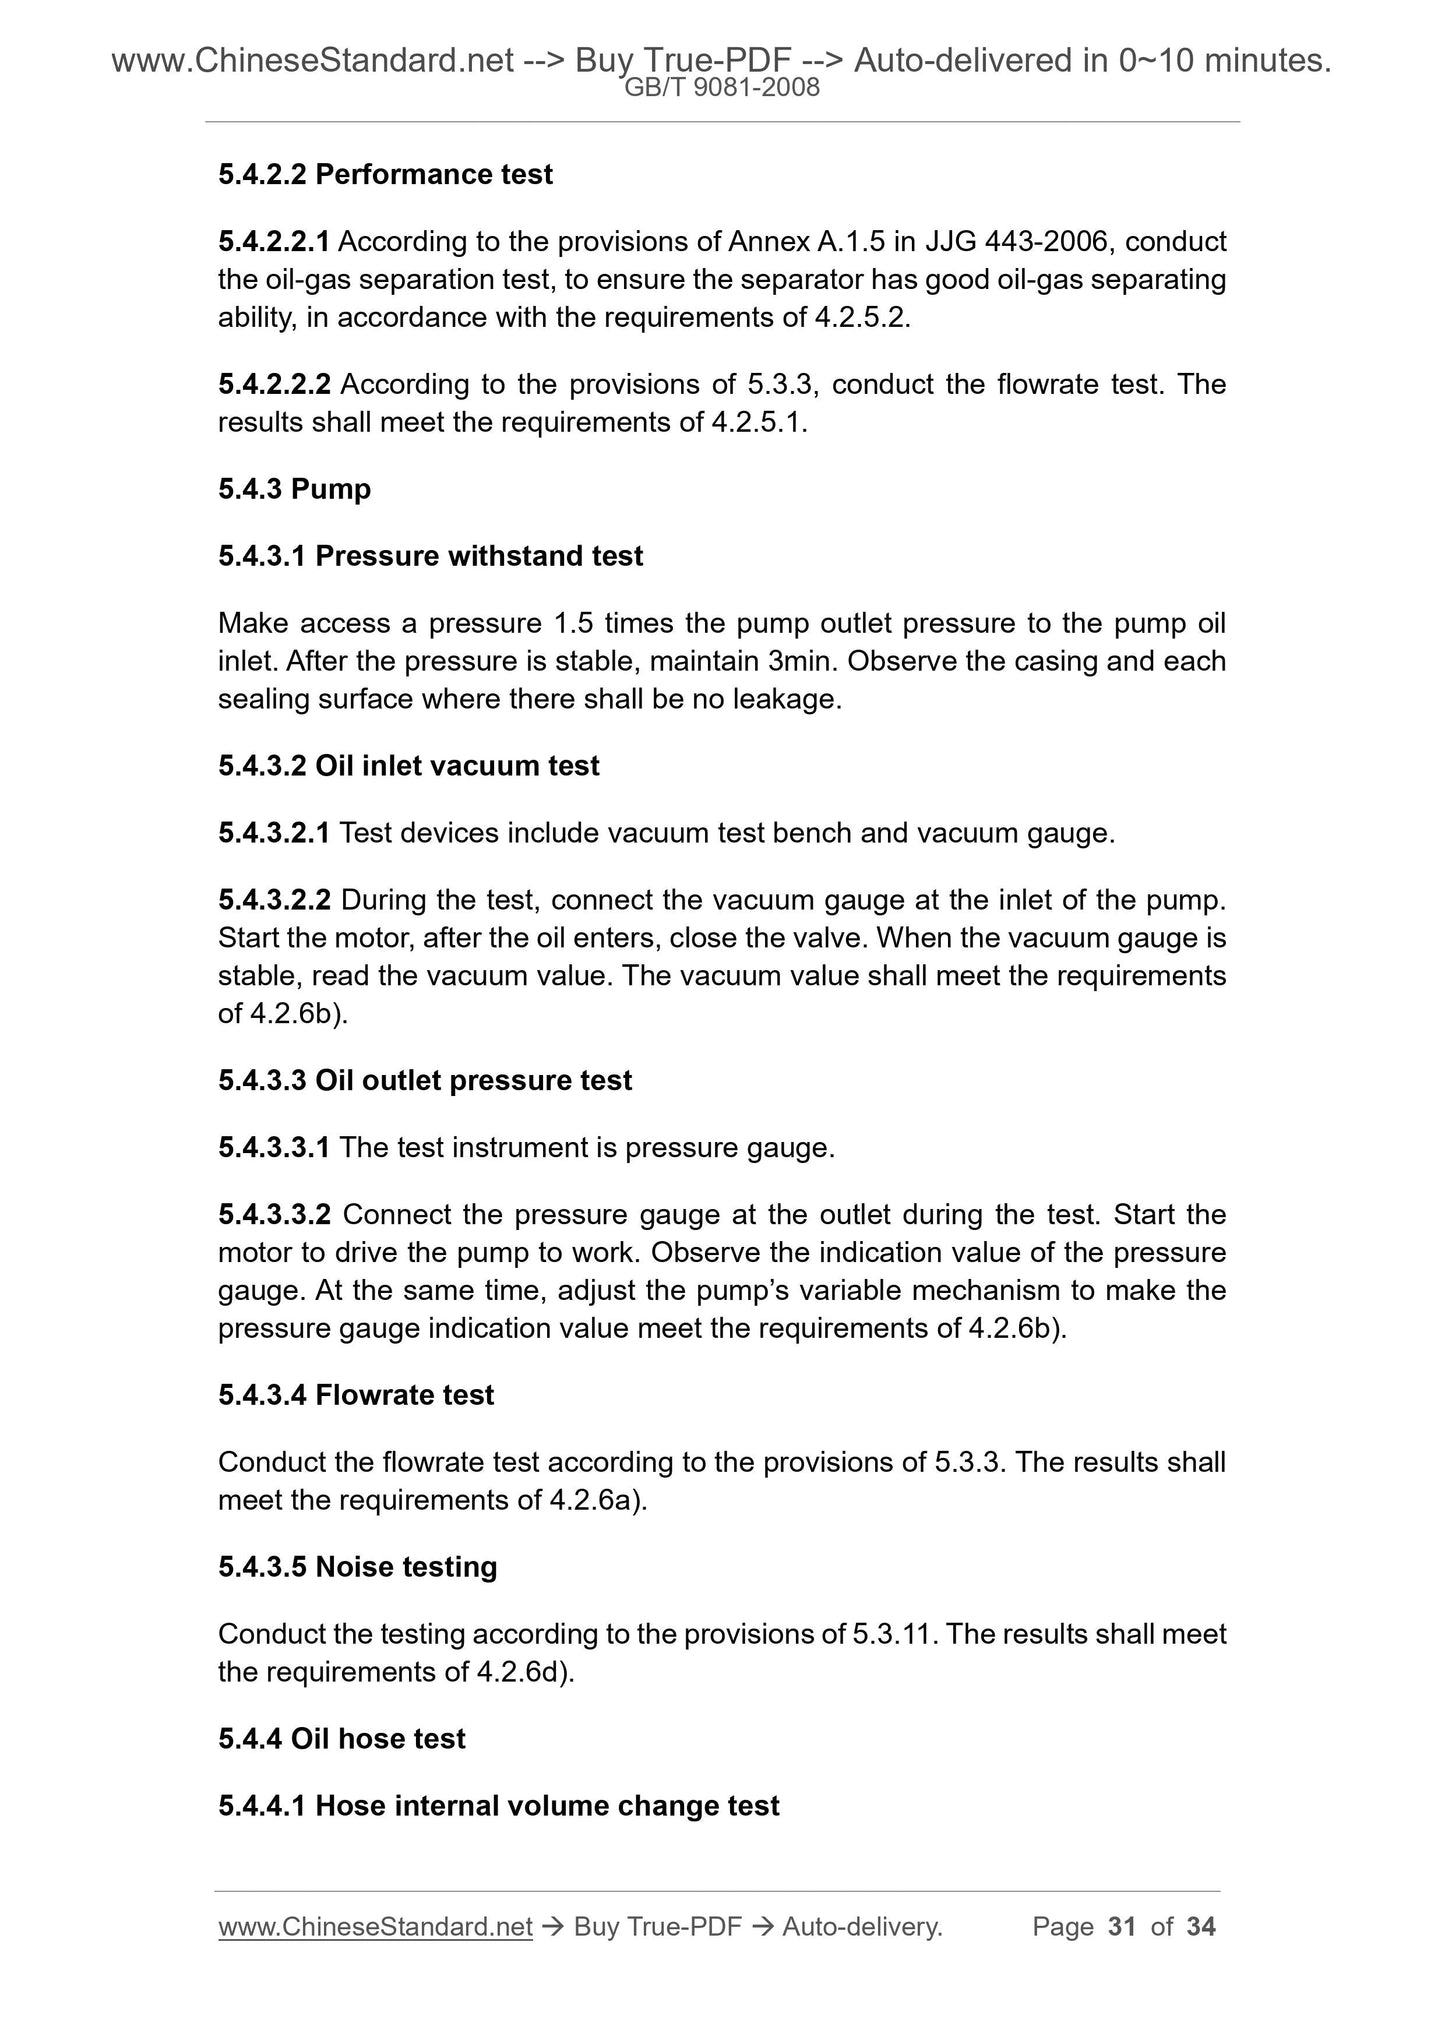 GB/T 9081-2008 Page 11